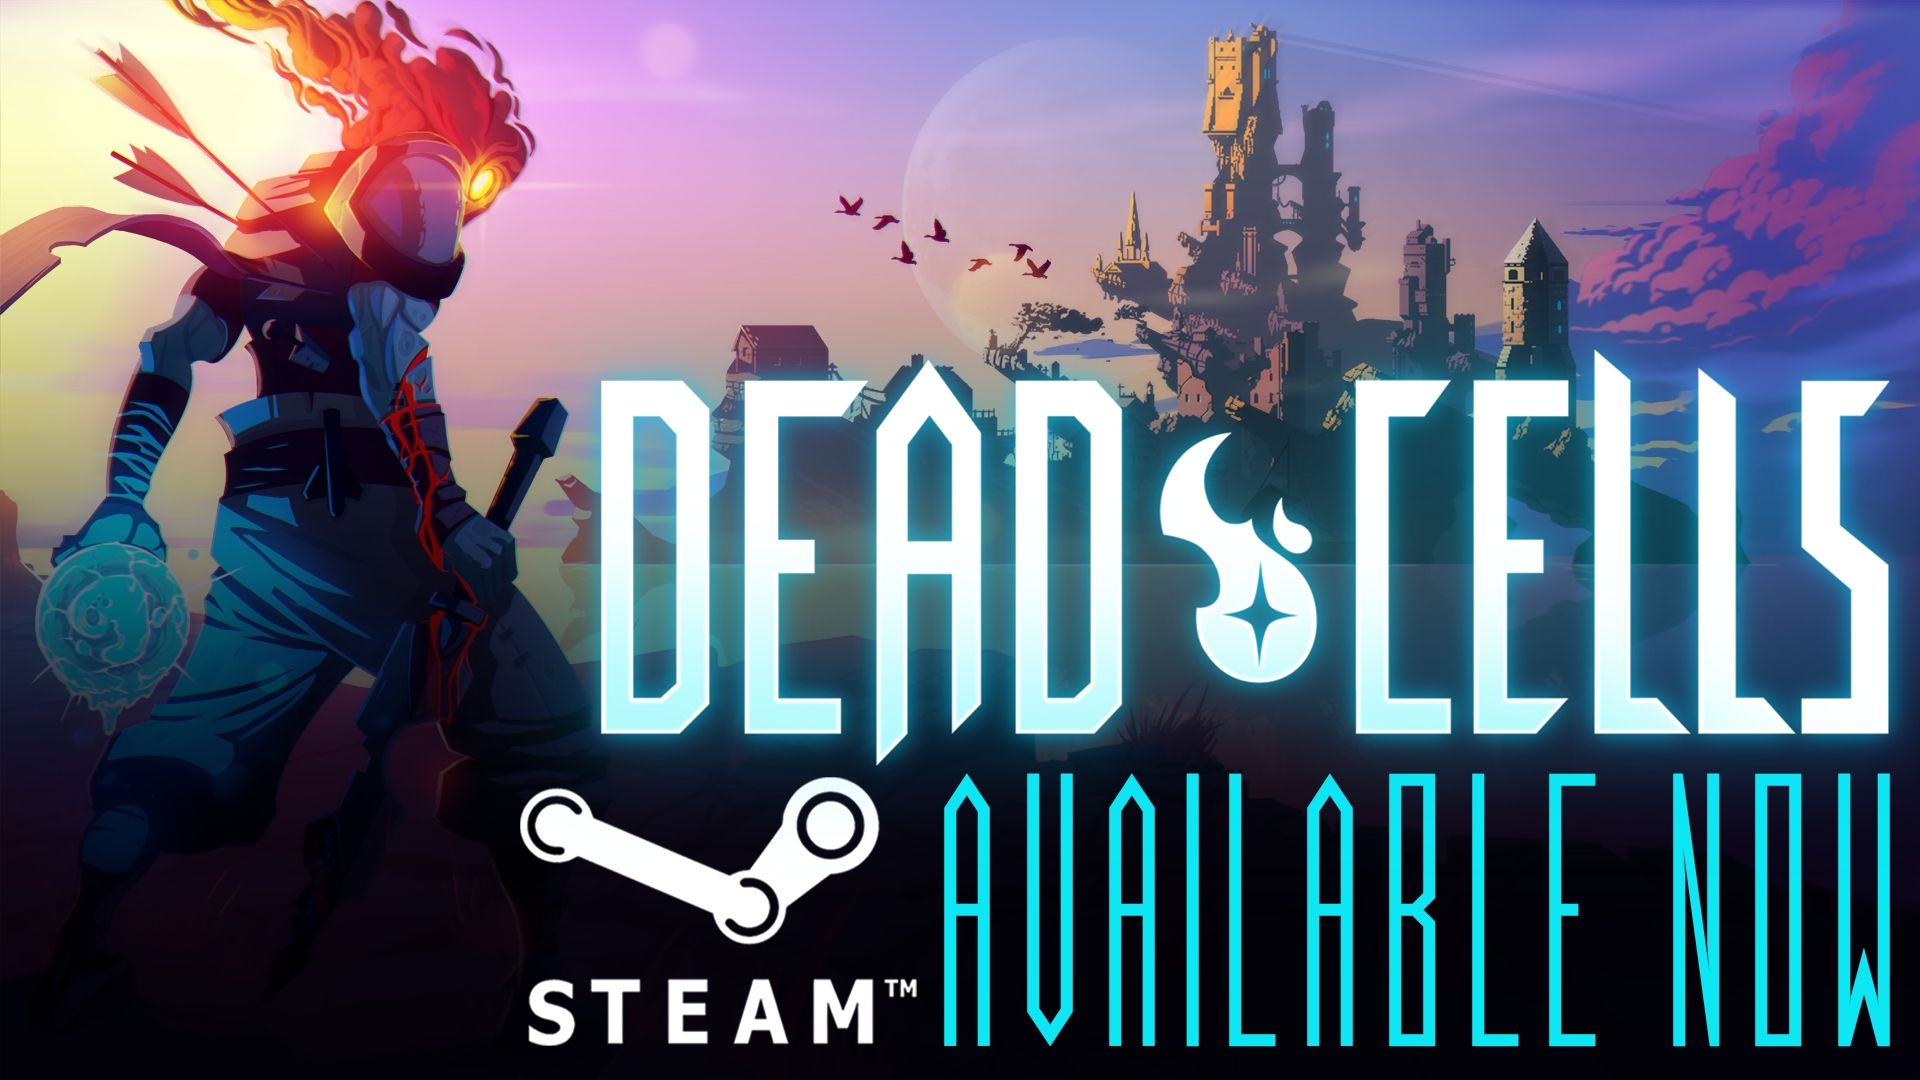 which version of dead cells do i have steam